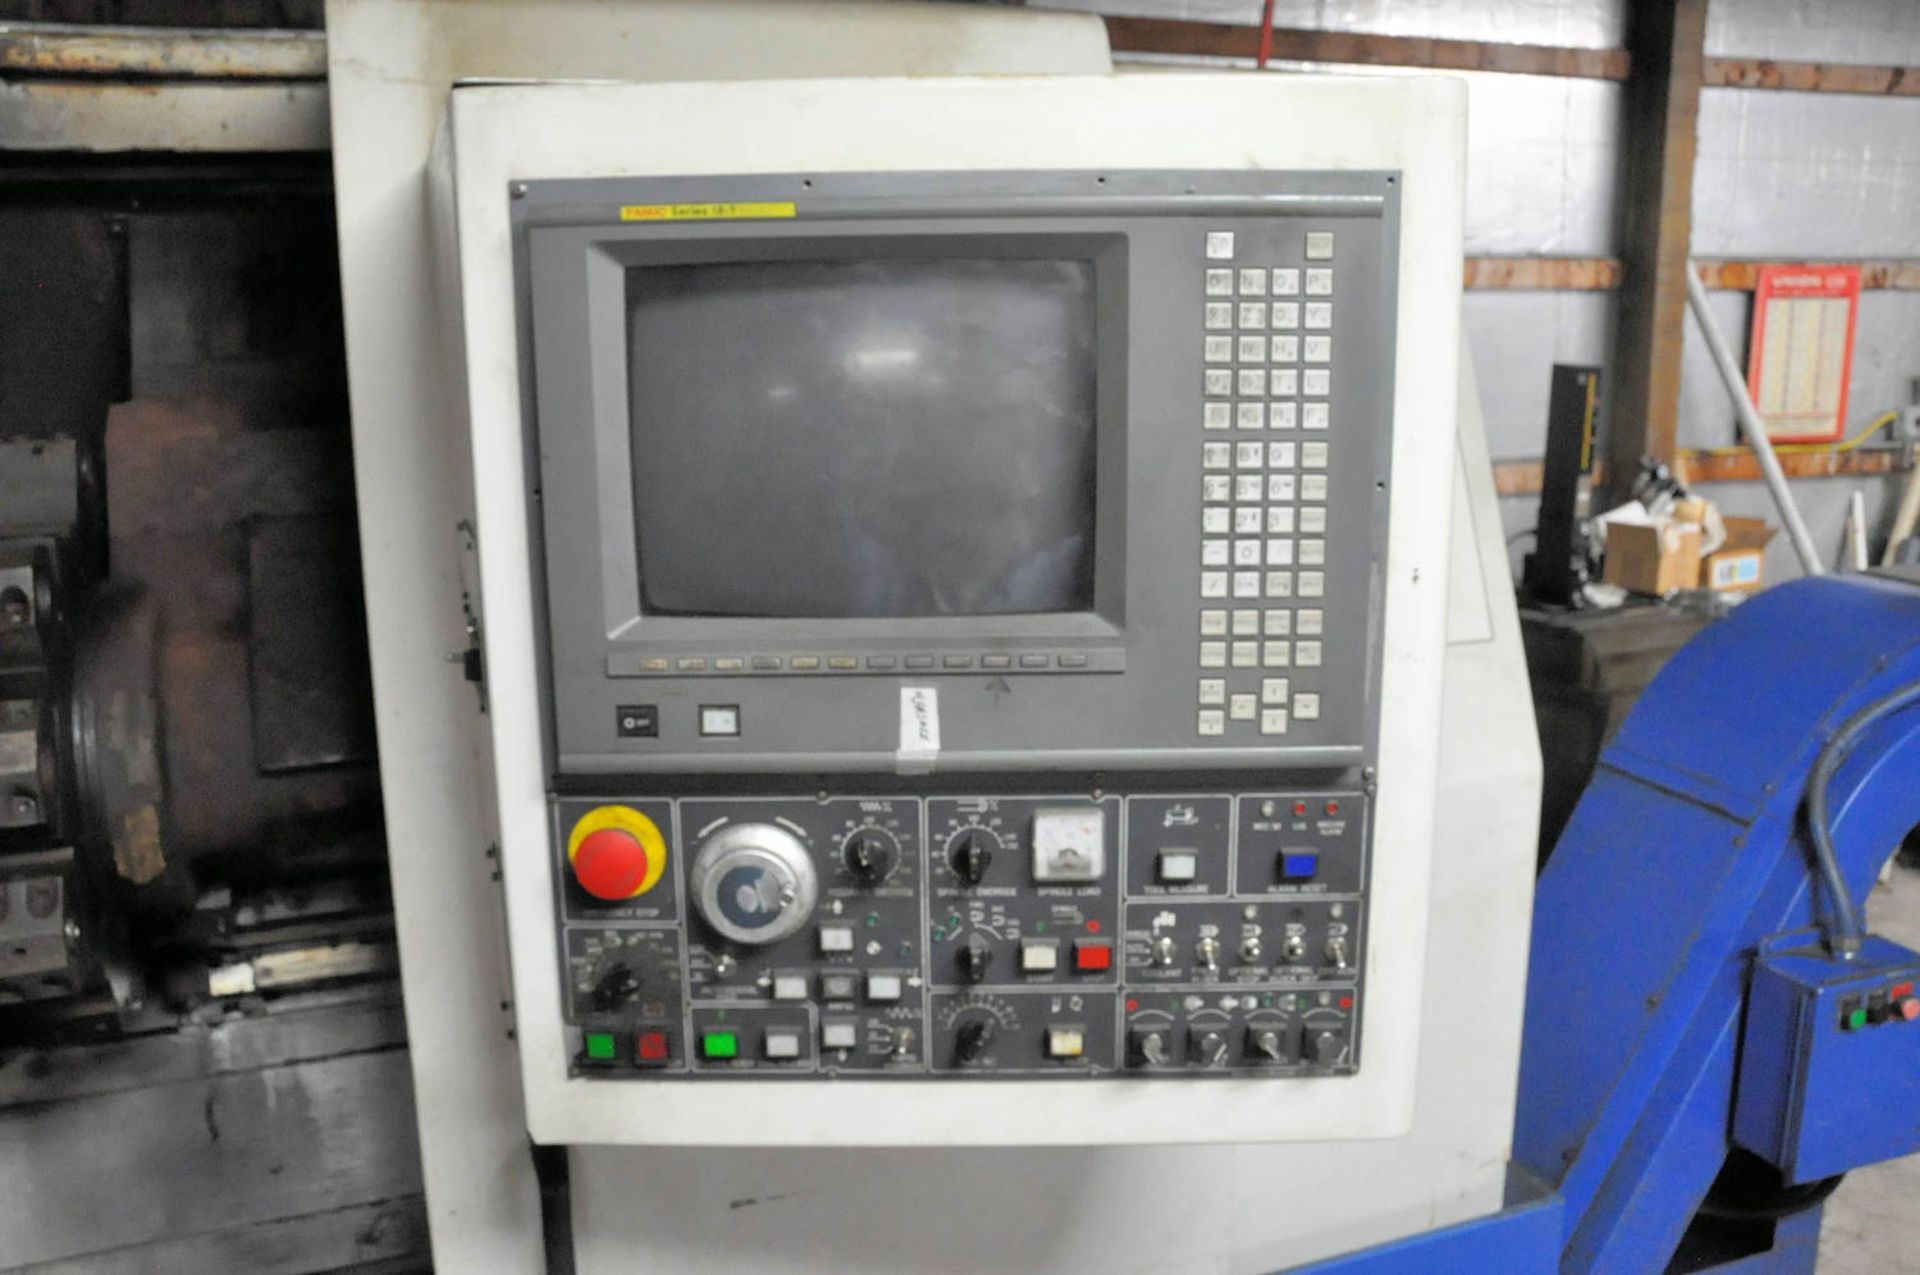 DAEWOO PUMA MDL. 12S LATHE, WITH FANUC SERIES 18-T CNC CONTROLLER, 3" THRU SPINDLE, 18" X 30" - Image 3 of 9